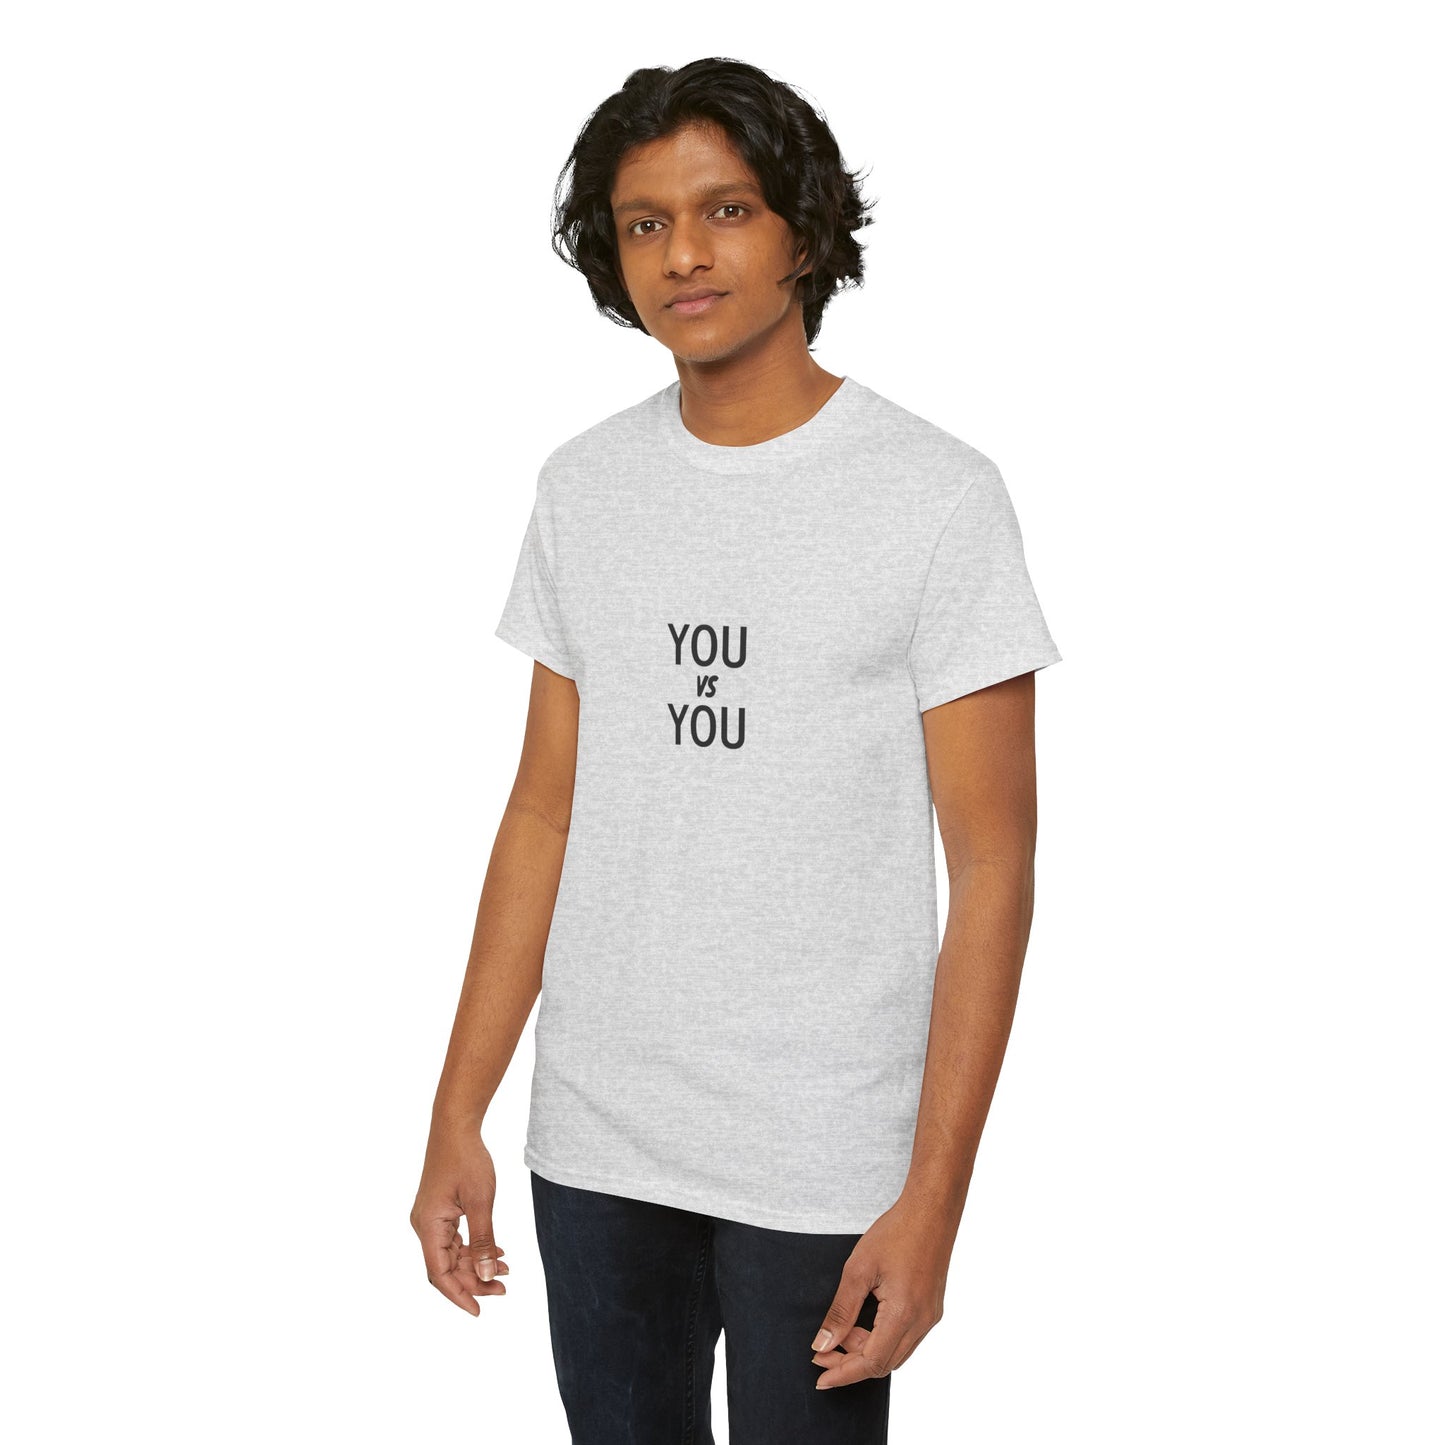 You VS You fitness T-shirt - Heavy Cotton Tee